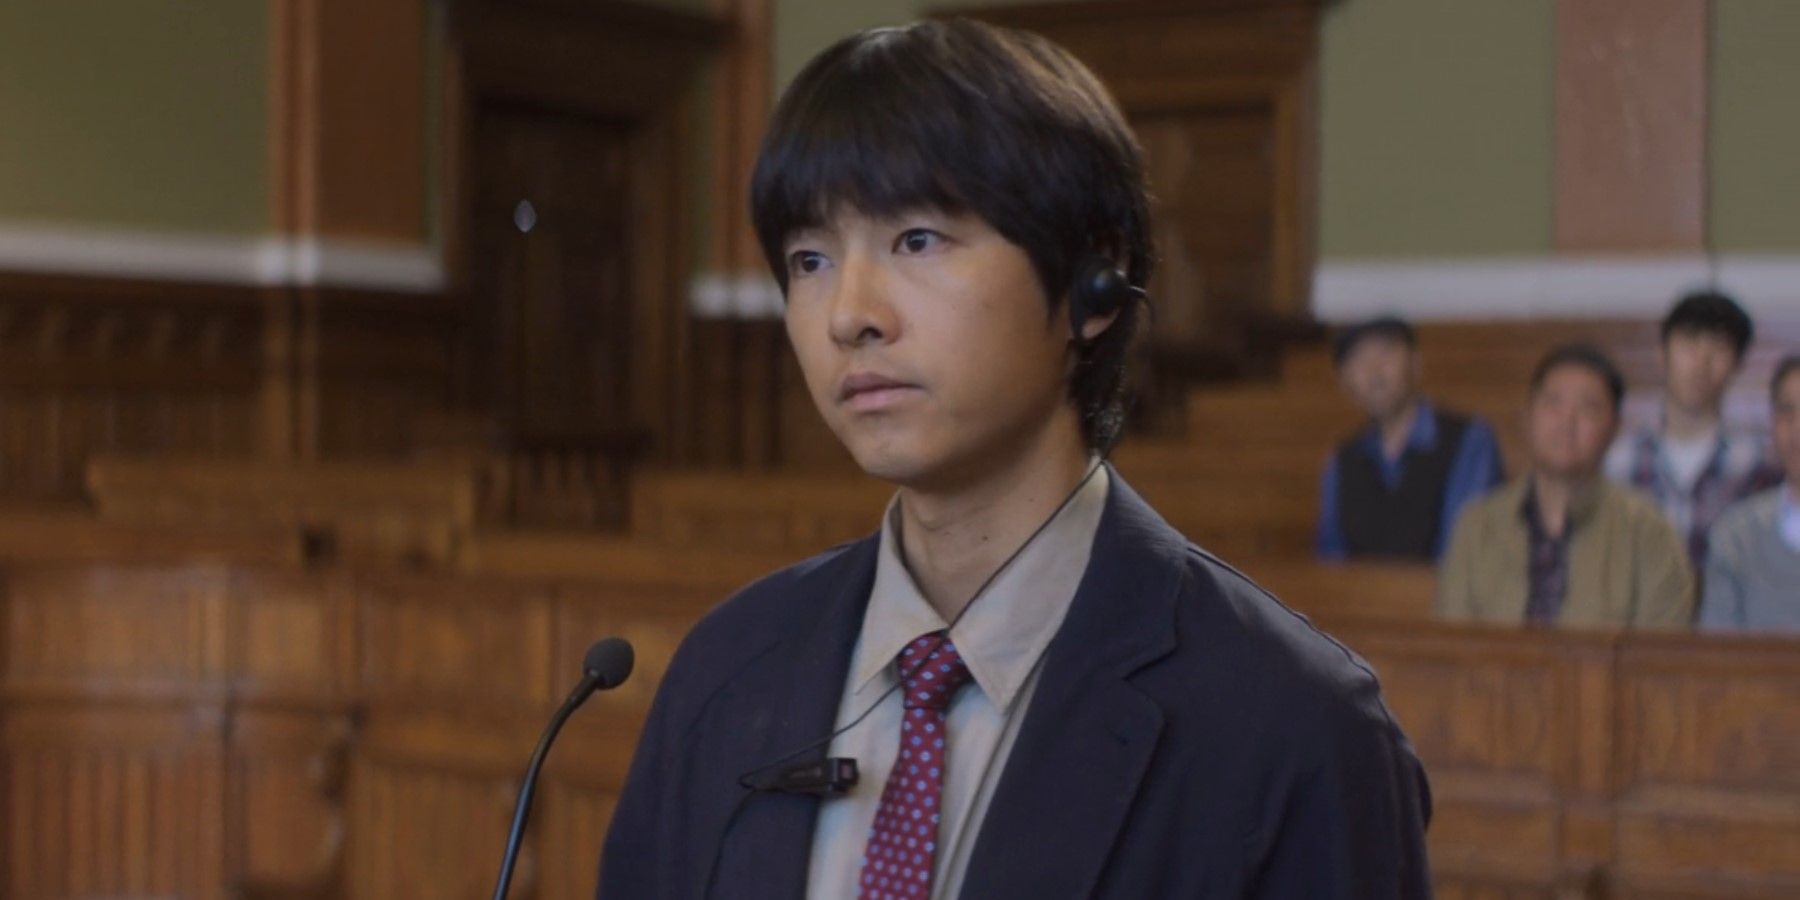 Loh Kiwan (Song Joong-ki) wears a translator ear piece and stands in front of a microphone during his trial to determine if he applies for Belgian refugee status in My Name is Loh Kiwan